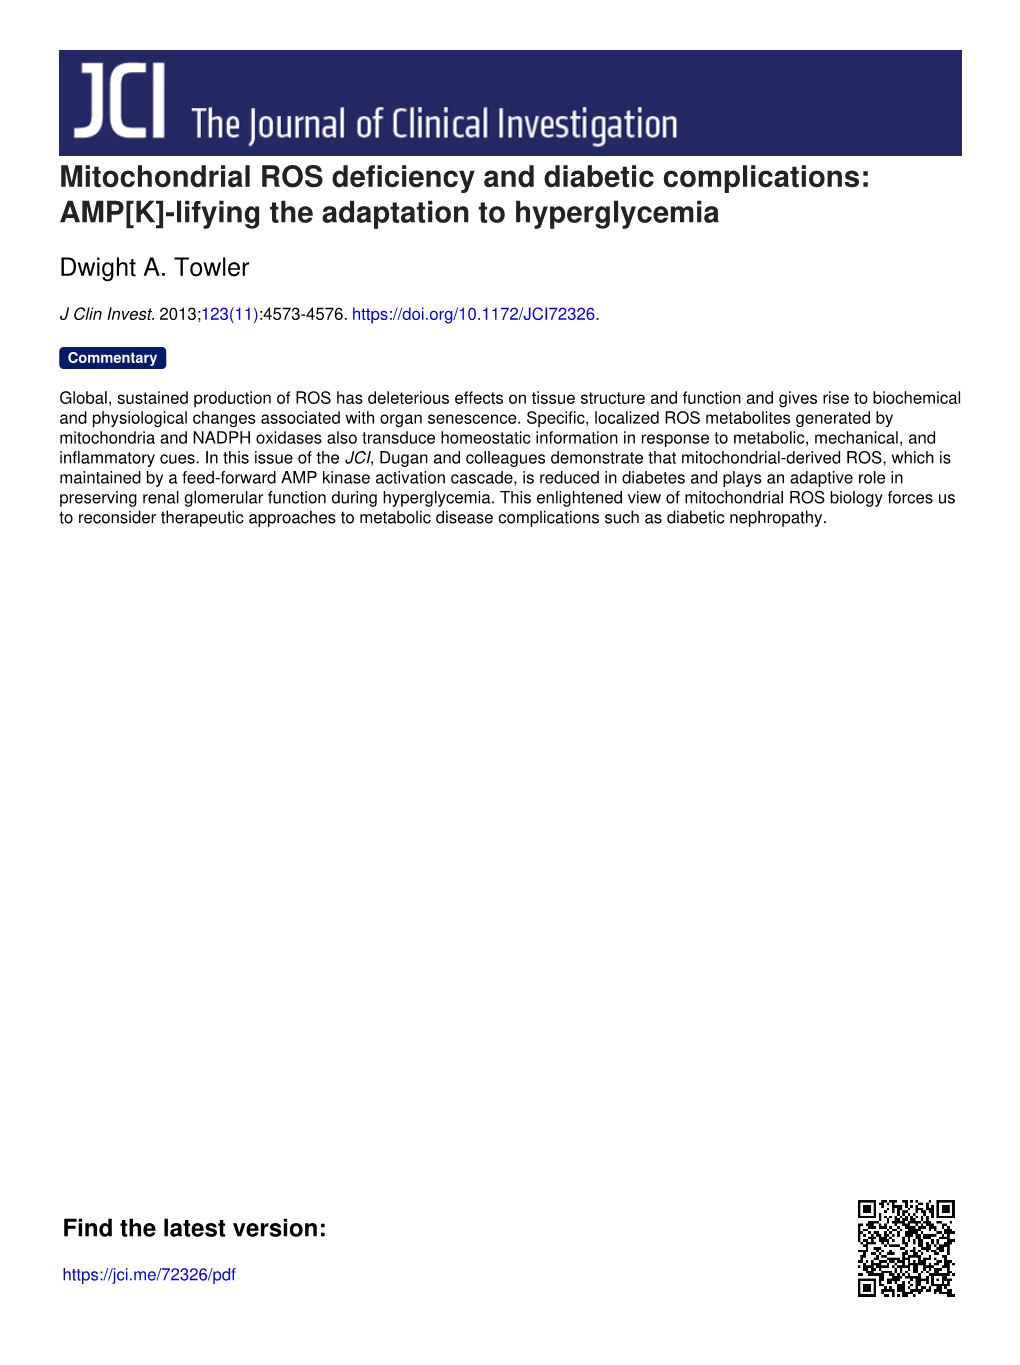 Mitochondrial ROS Deficiency and Diabetic Complications: AMP[K]-Lifying the Adaptation to Hyperglycemia